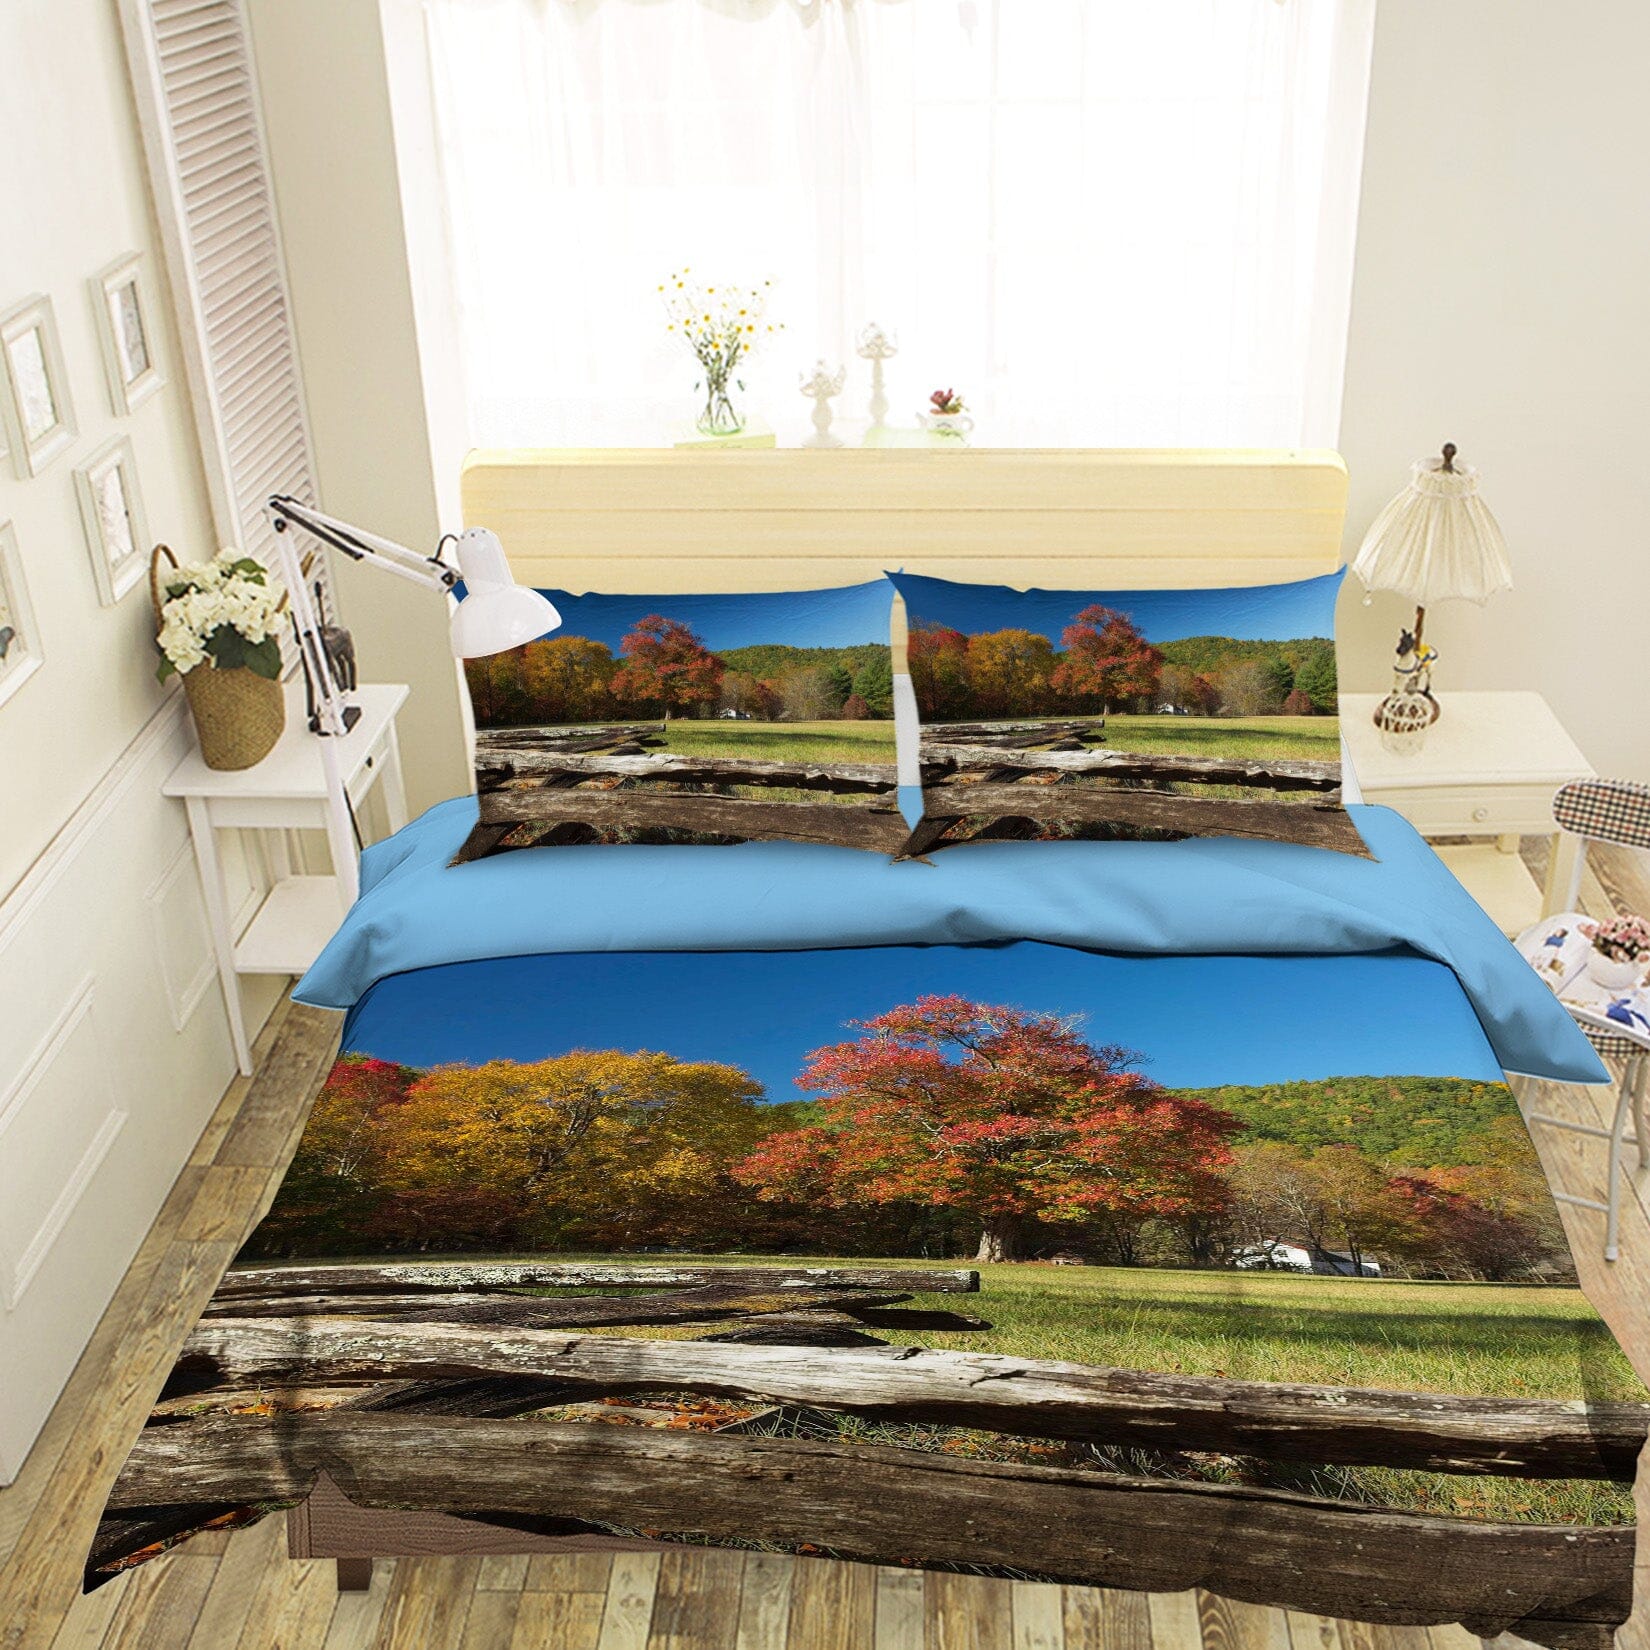 3D Natural Park 2128 Kathy Barefield Bedding Bed Pillowcases Quilt Quiet Covers AJ Creativity Home 